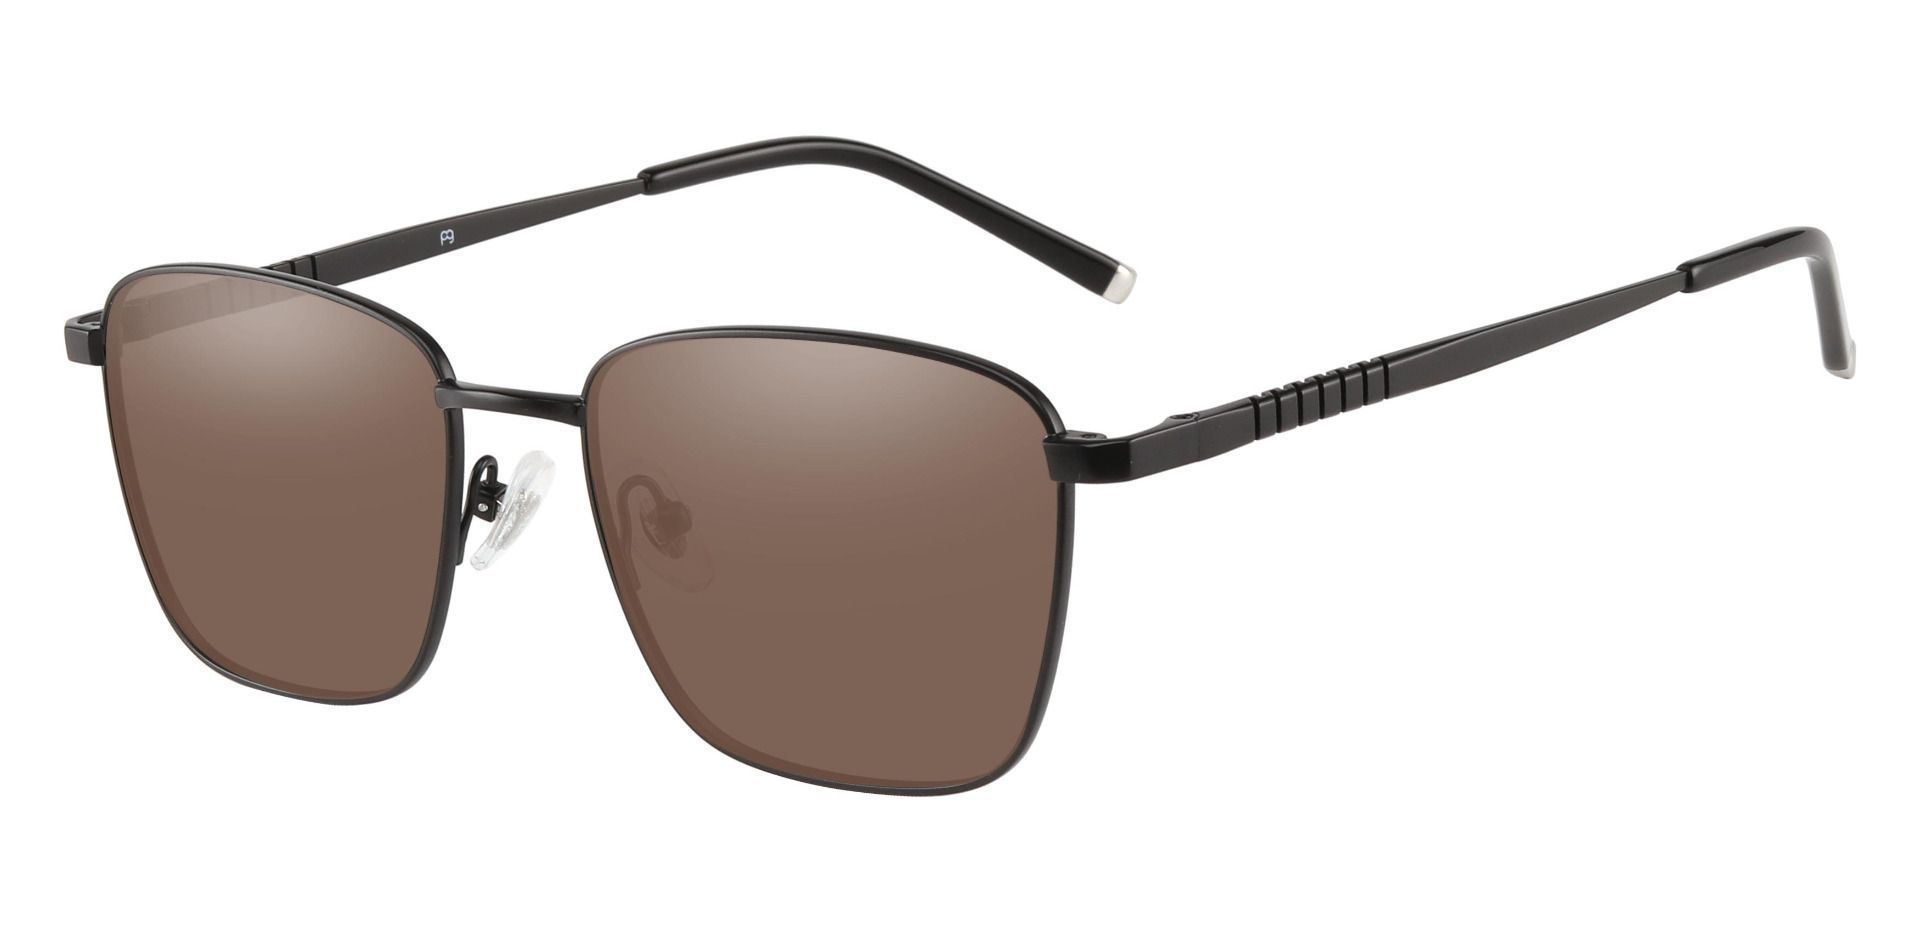 May Square Reading Sunglasses - Black Frame With Brown Lenses